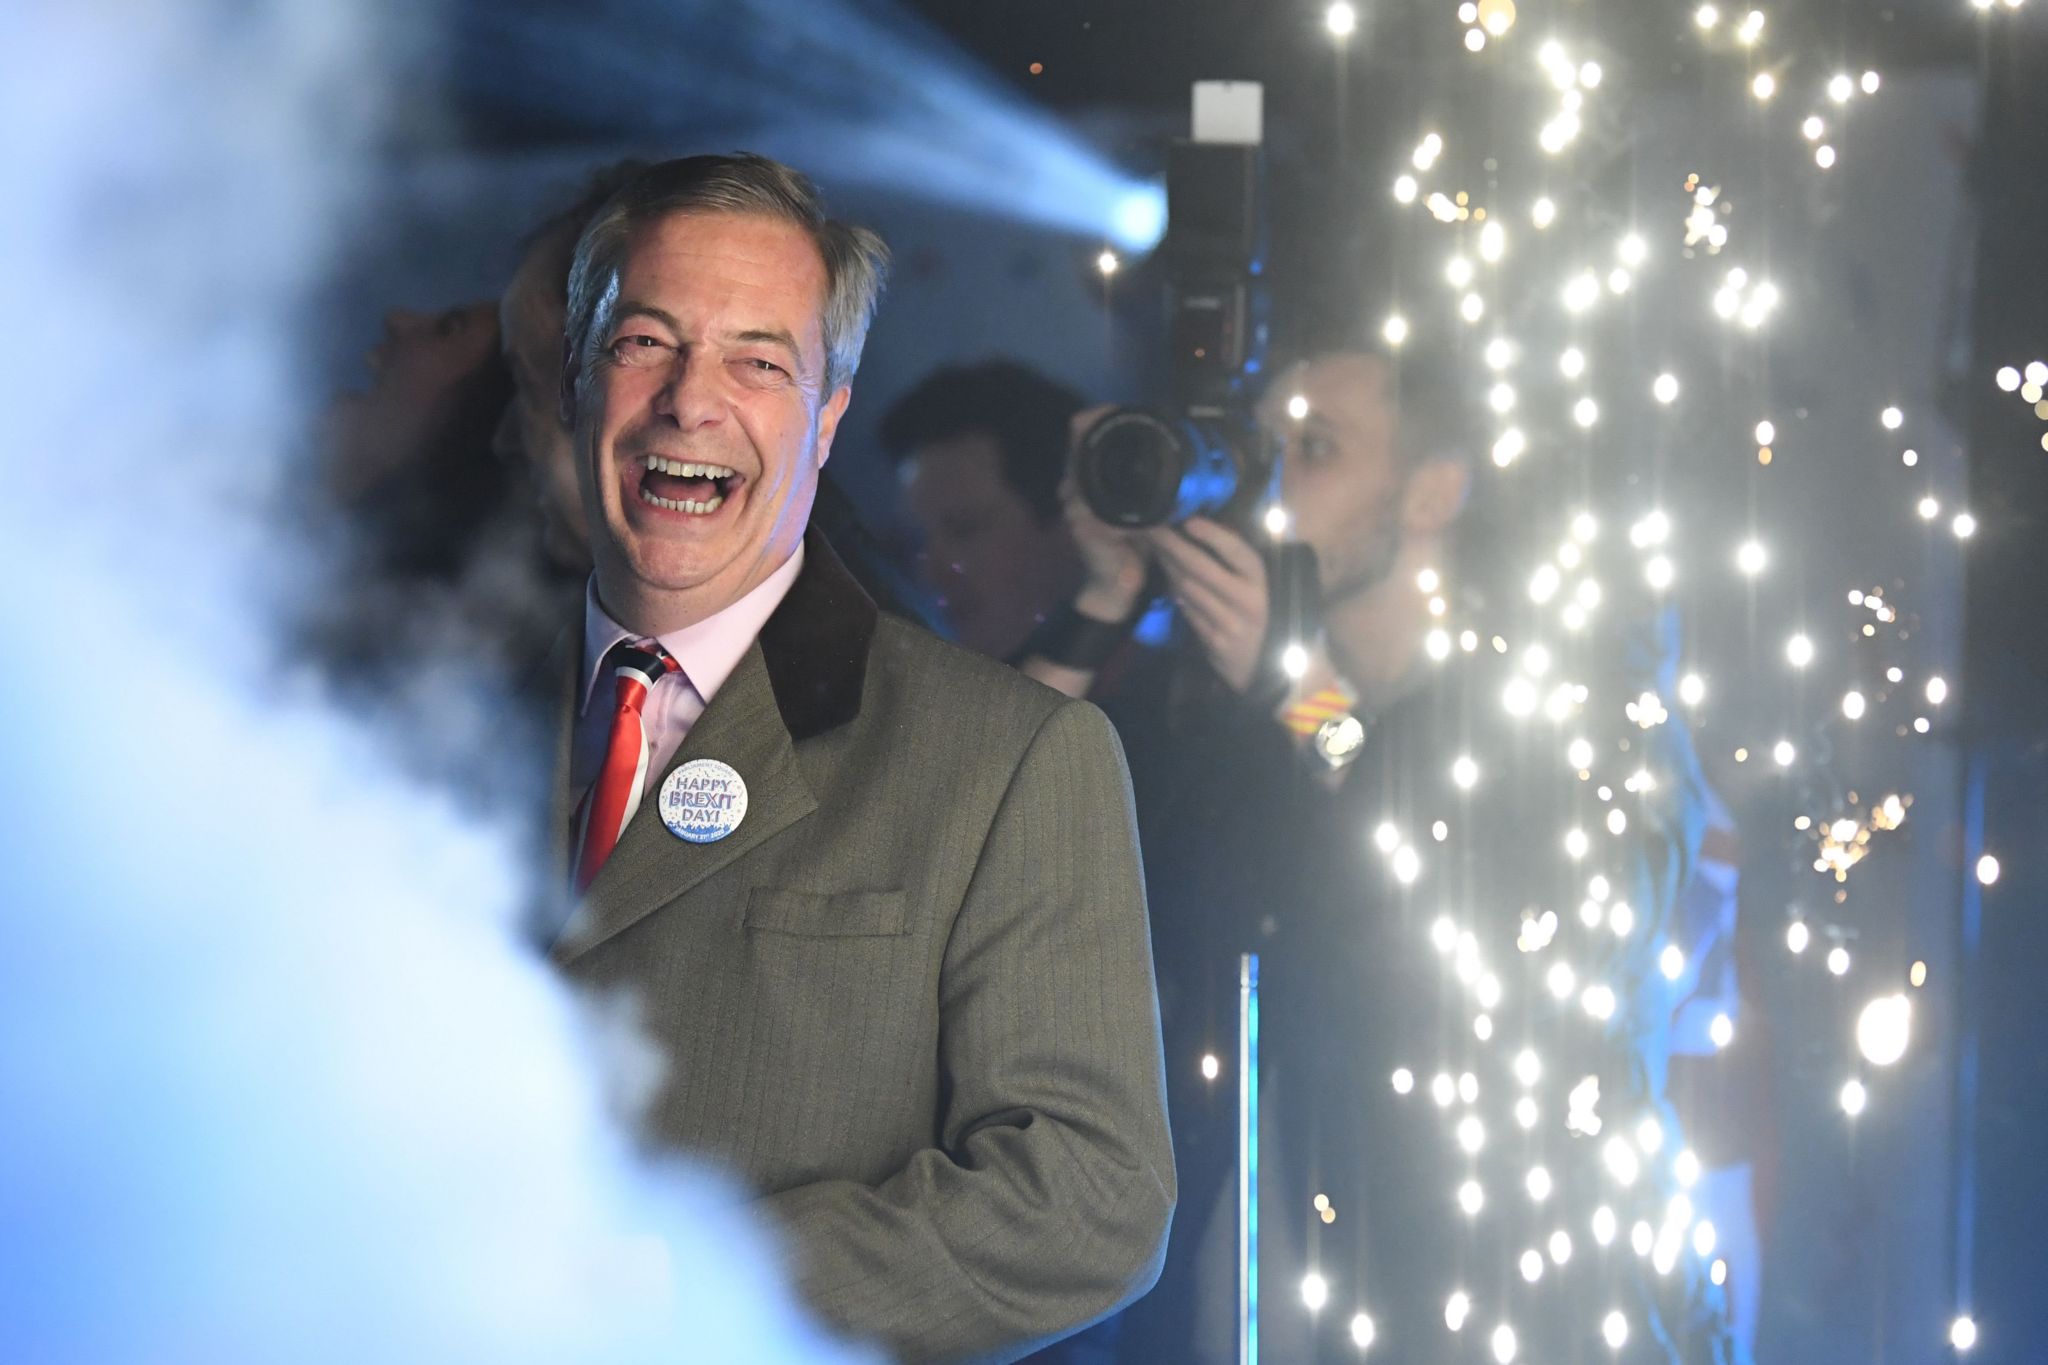 Brexit Party leader Nigel Farage looks delighted as Britain leaves the EU